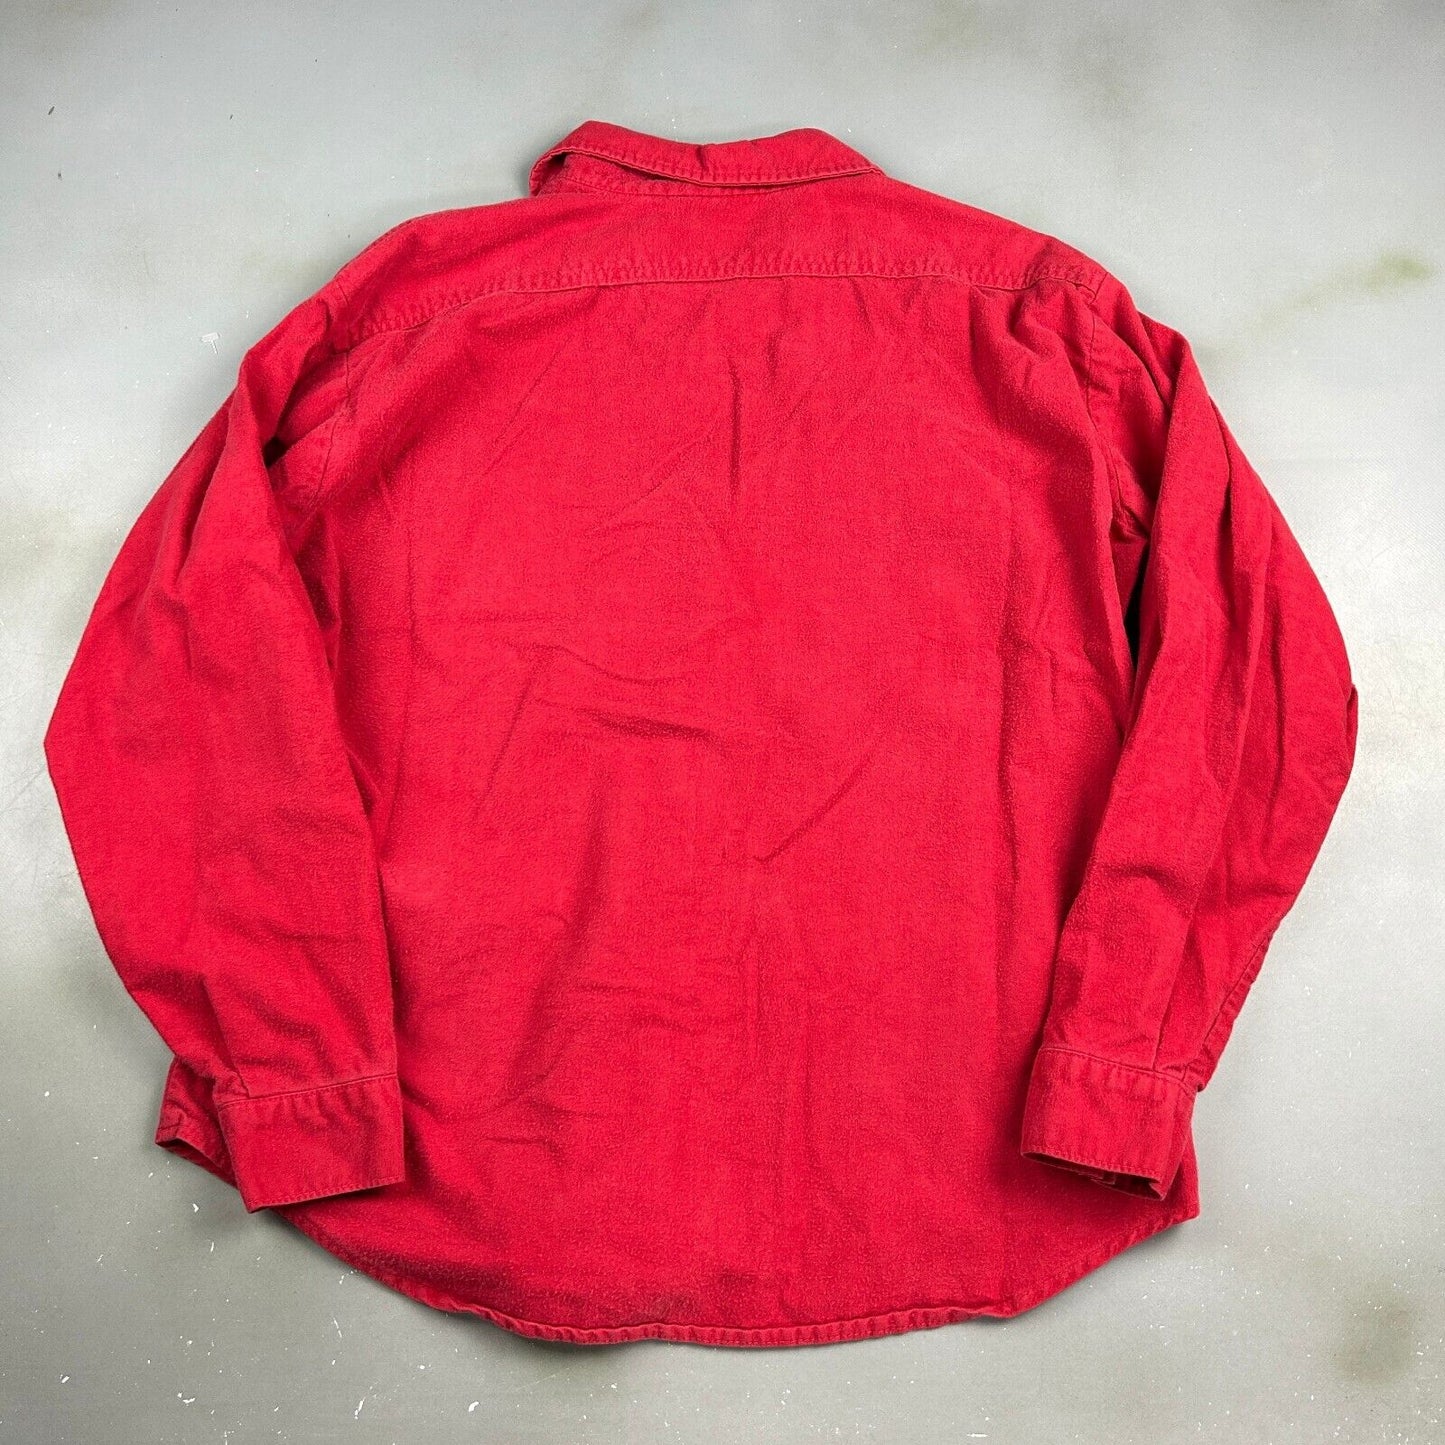 VINTAGE 90s Five Brother Red Chamois Cloth Button Up Shirt sz XL Adult